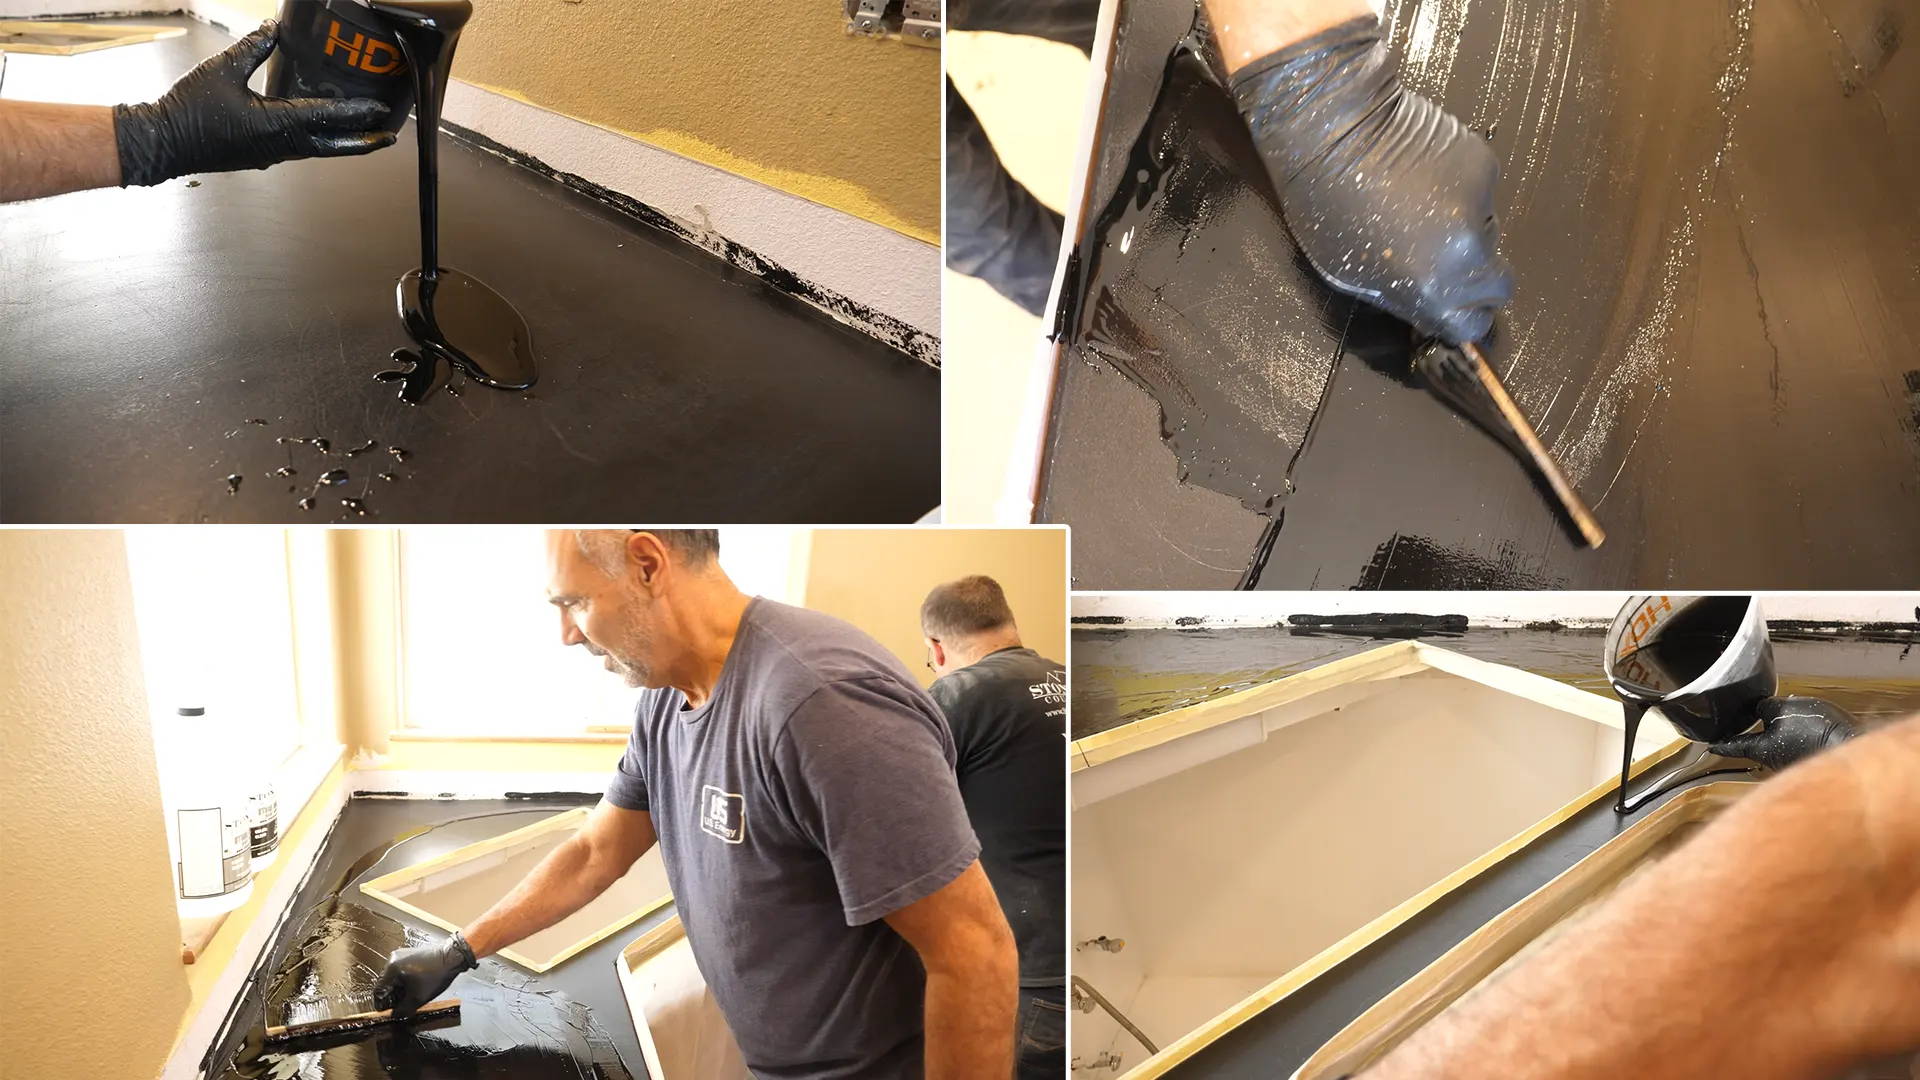 Applying black tinted epoxy on the countertops and spreading it with a mixing stick or gloved hand to cover the surface.